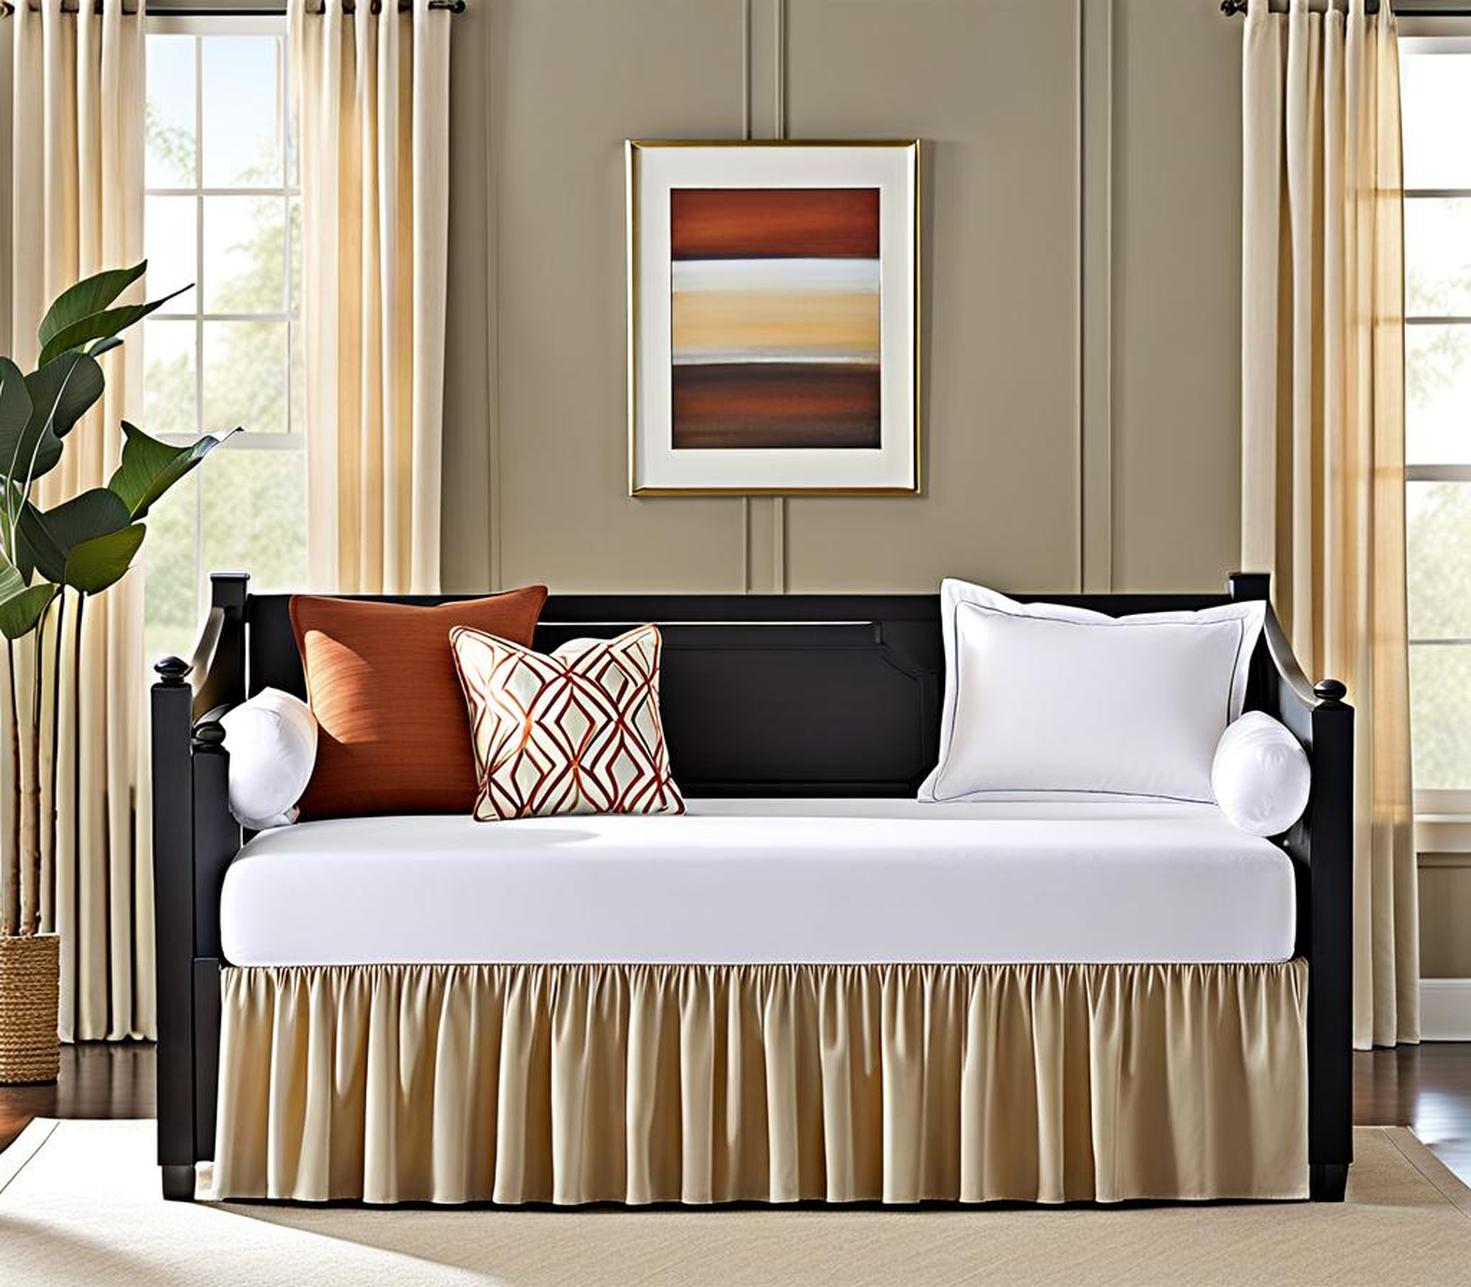 bed skirt for a daybed